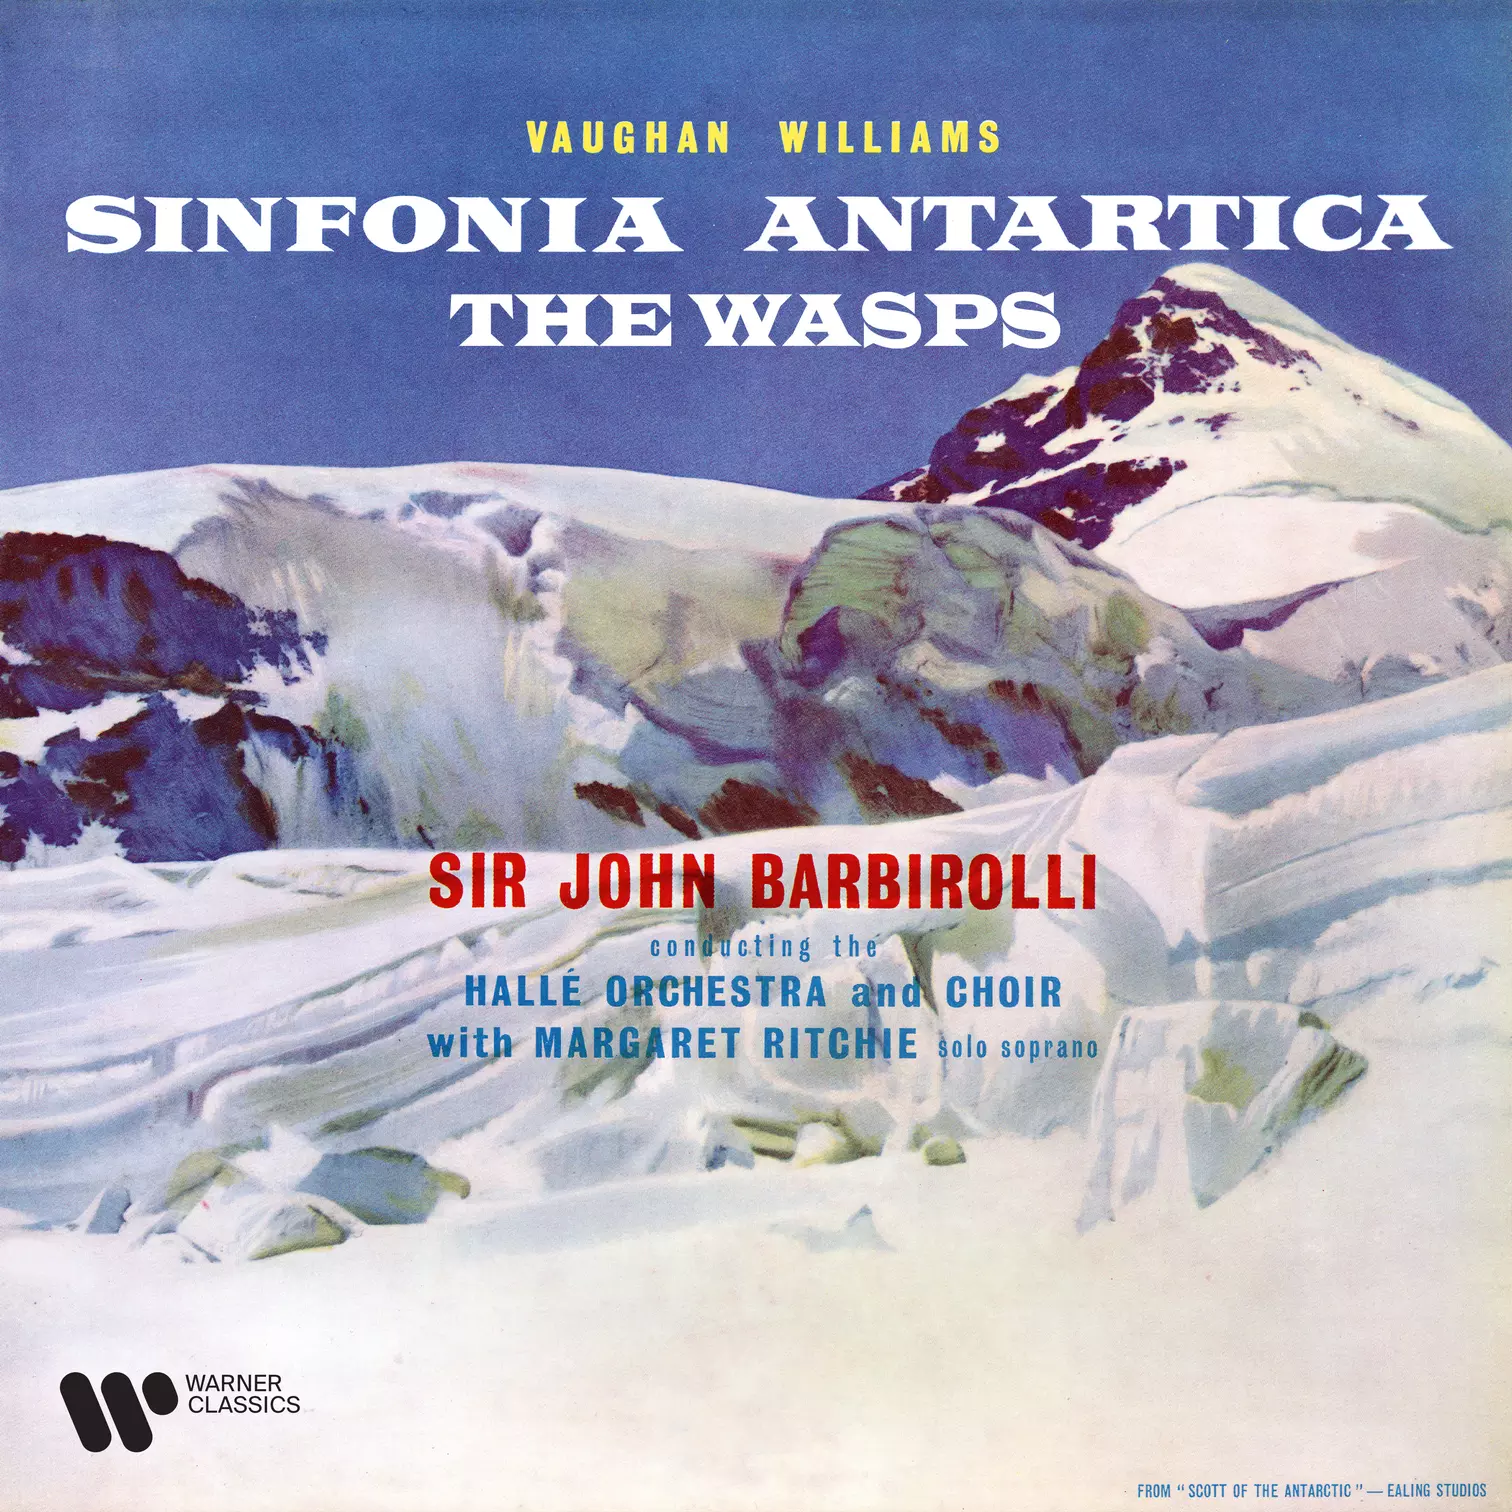 Vaughan Williams: Symphony No. 7 “Sinfonia antartica” & Overture from The Wasps